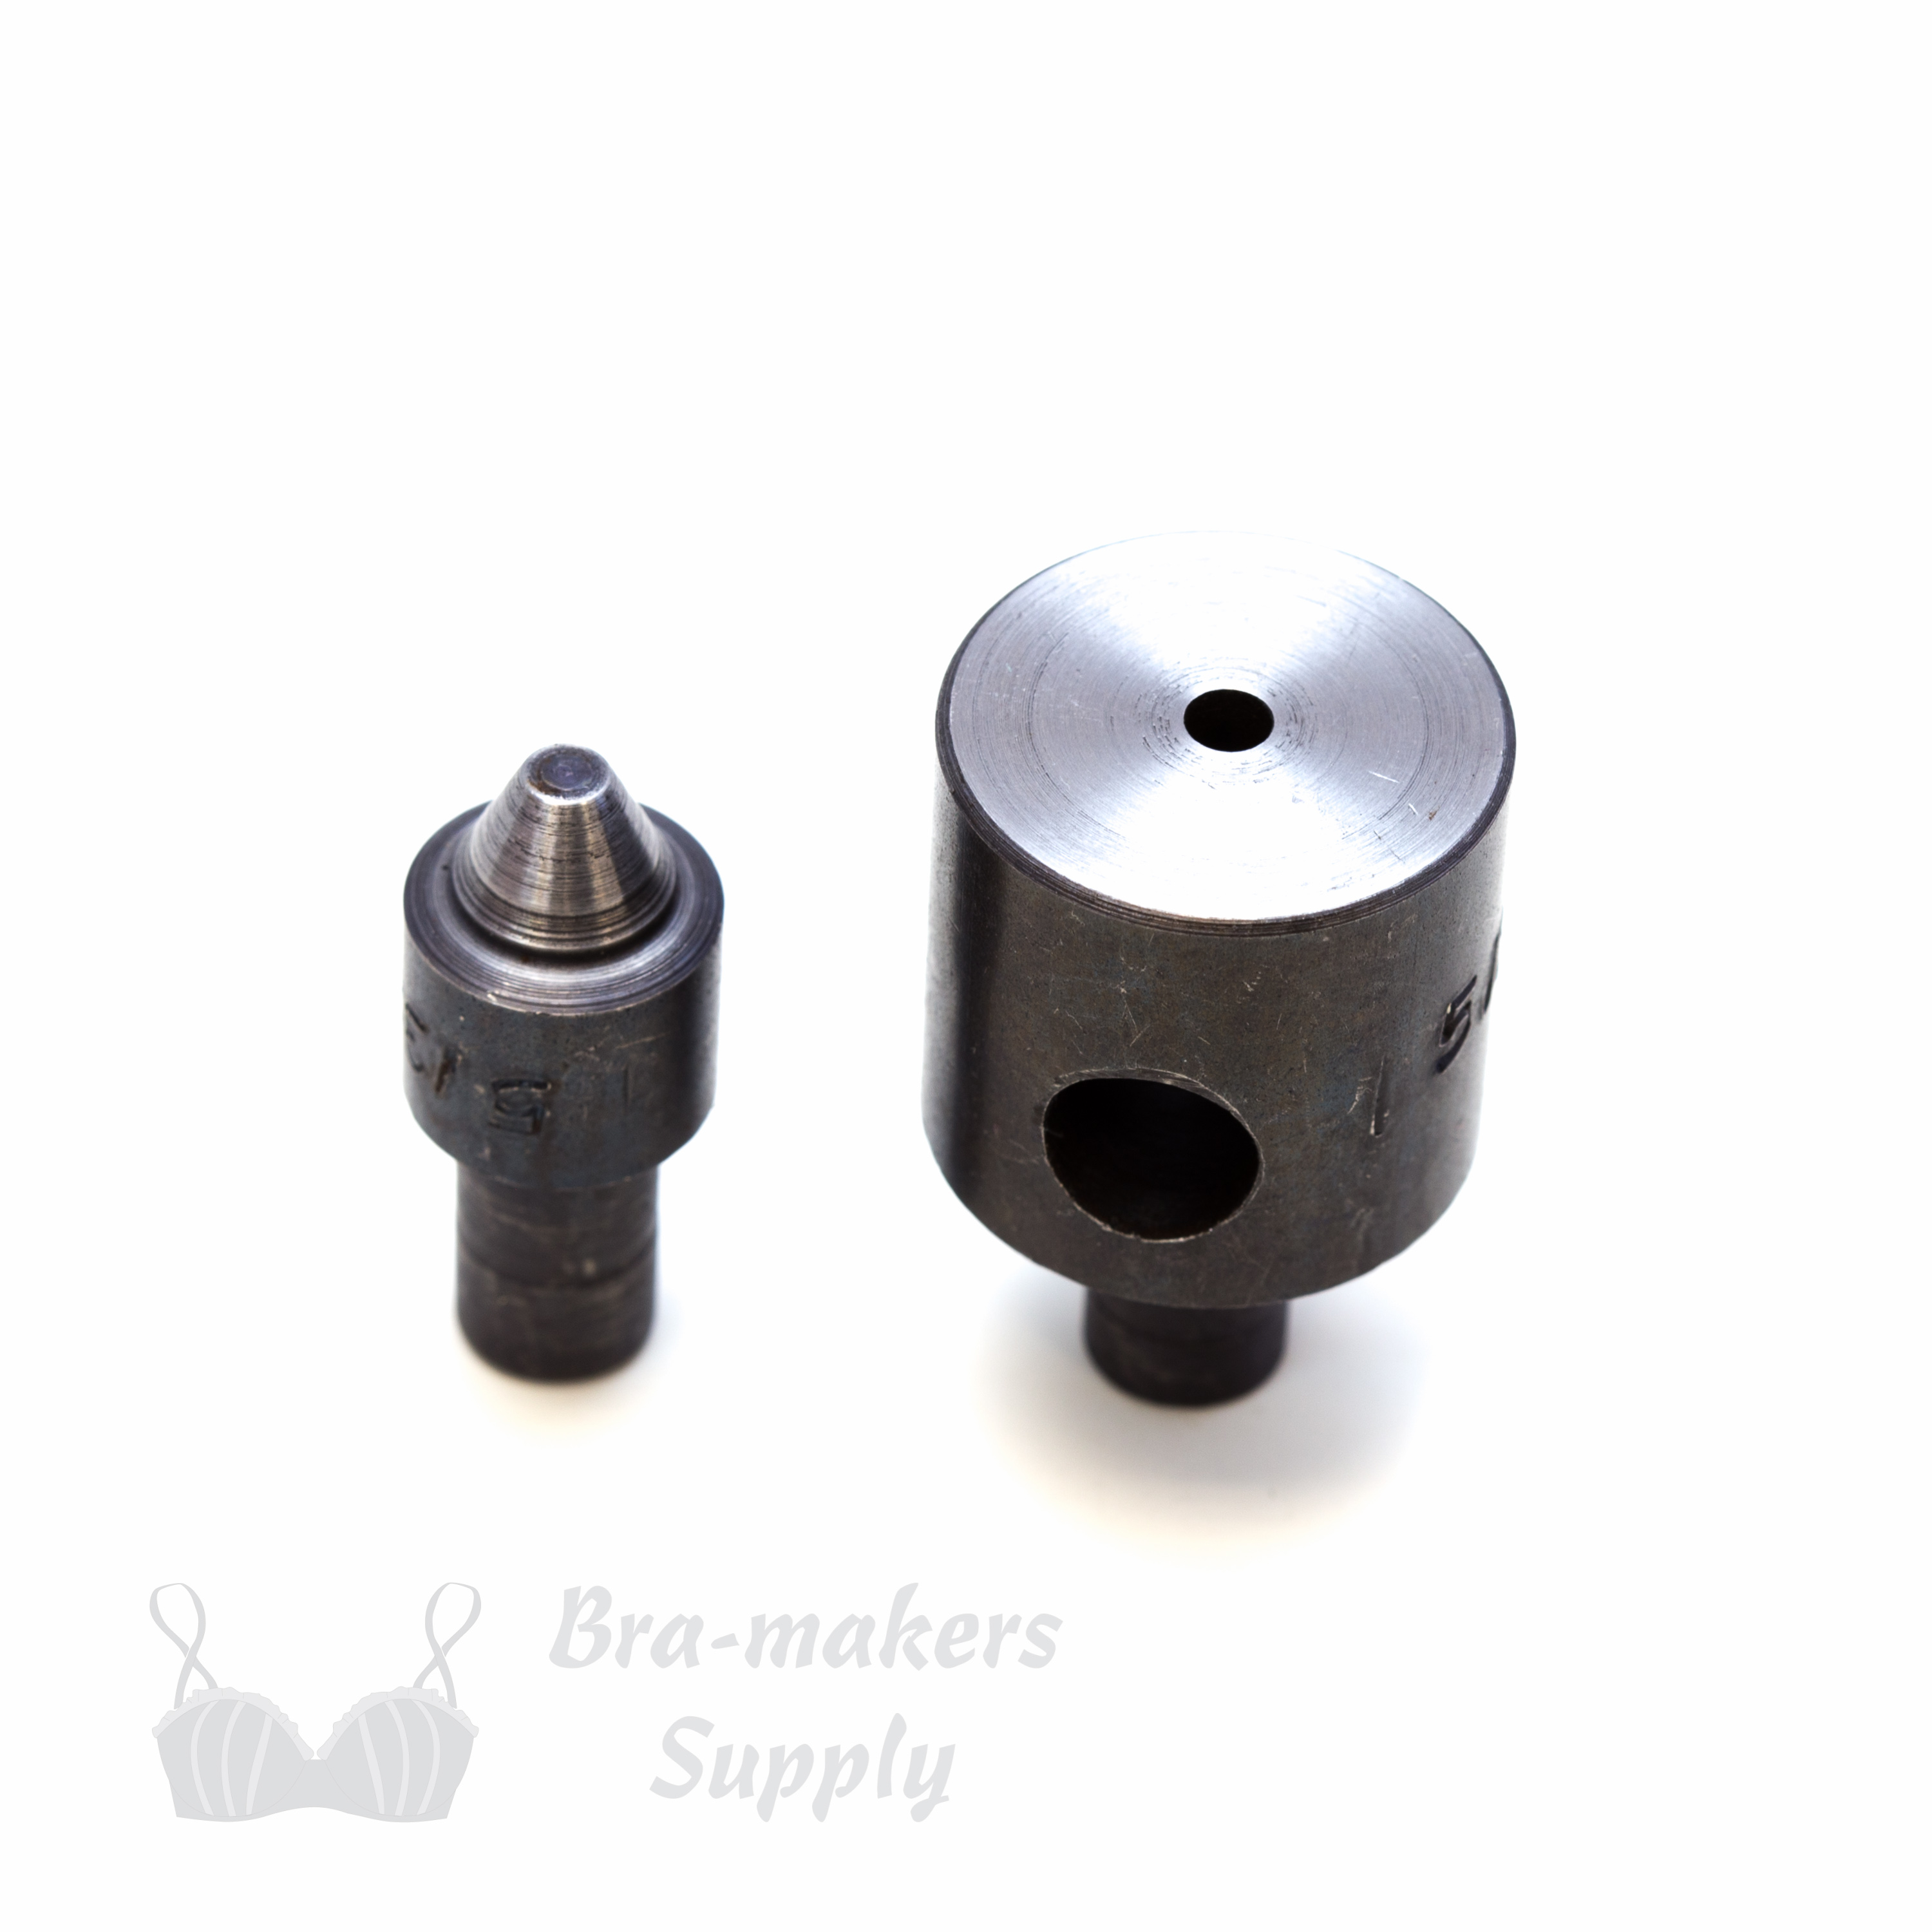 size 00 five thirty seconds of an inch or 4 mm grommet hole cutting dies BGH-56.00 fro Bra-Makers Supply front view shown